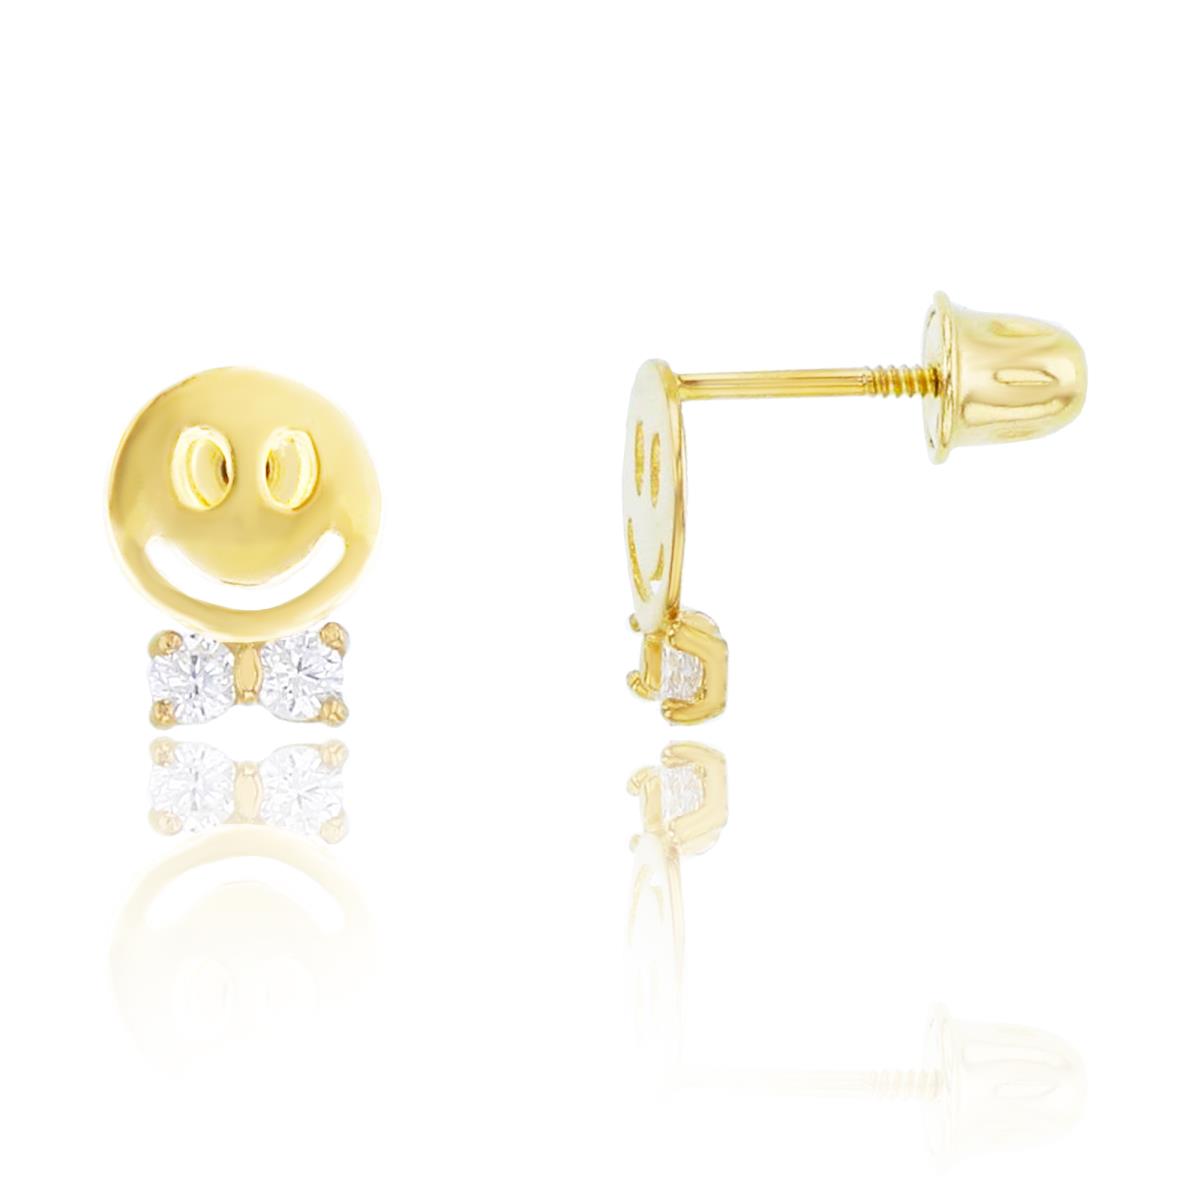 14K Yellow Gold Smiley Face with Bow Tie Screwback Stud Earring